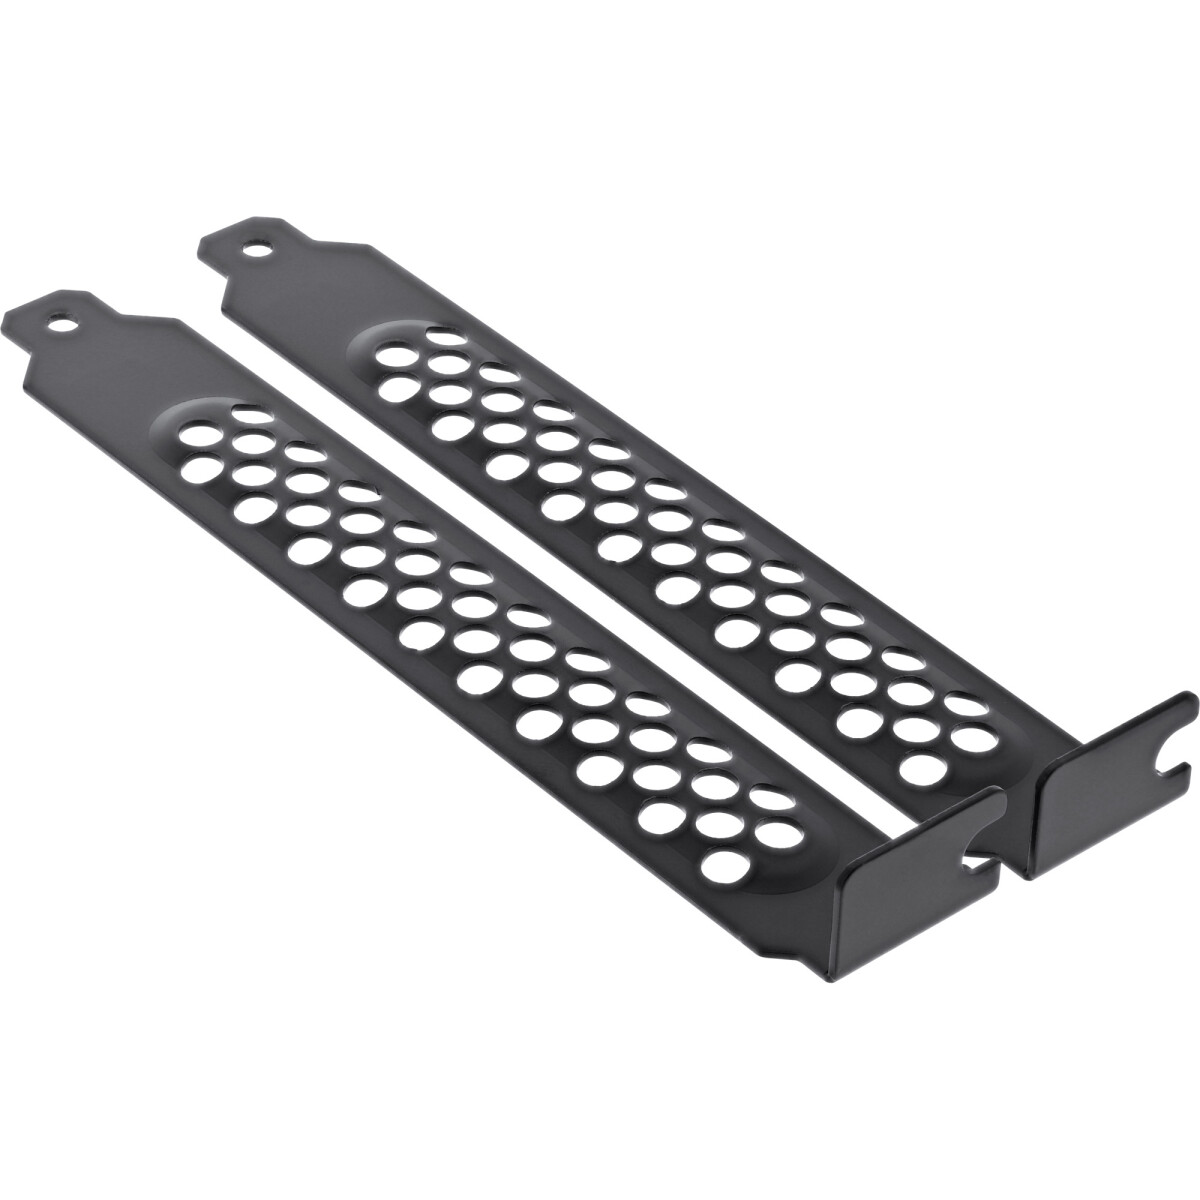 InLine® PCI / PCI-E Slot Cover Bracket perforated...